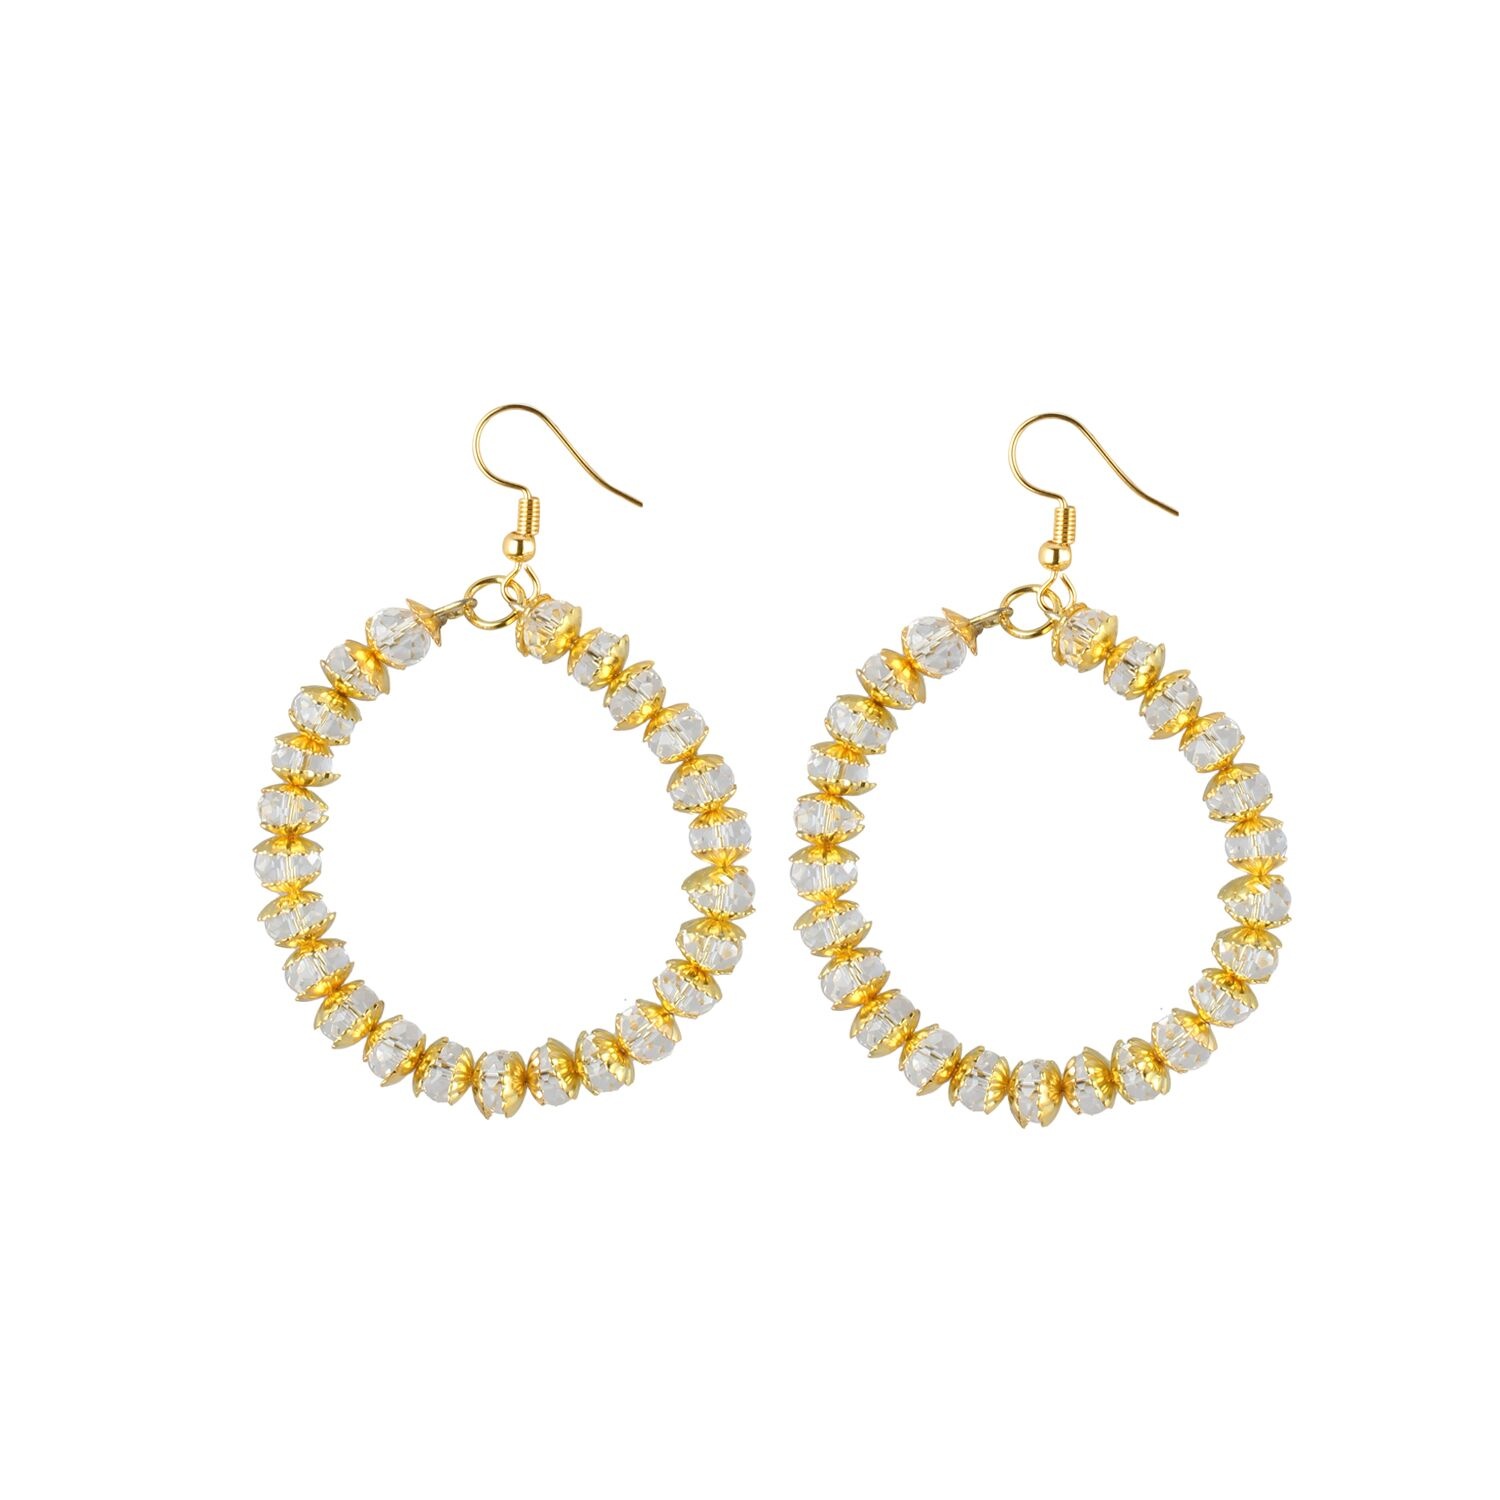 Generic Women's Alloy, Golden Crytal Hanging Earrings-Gold